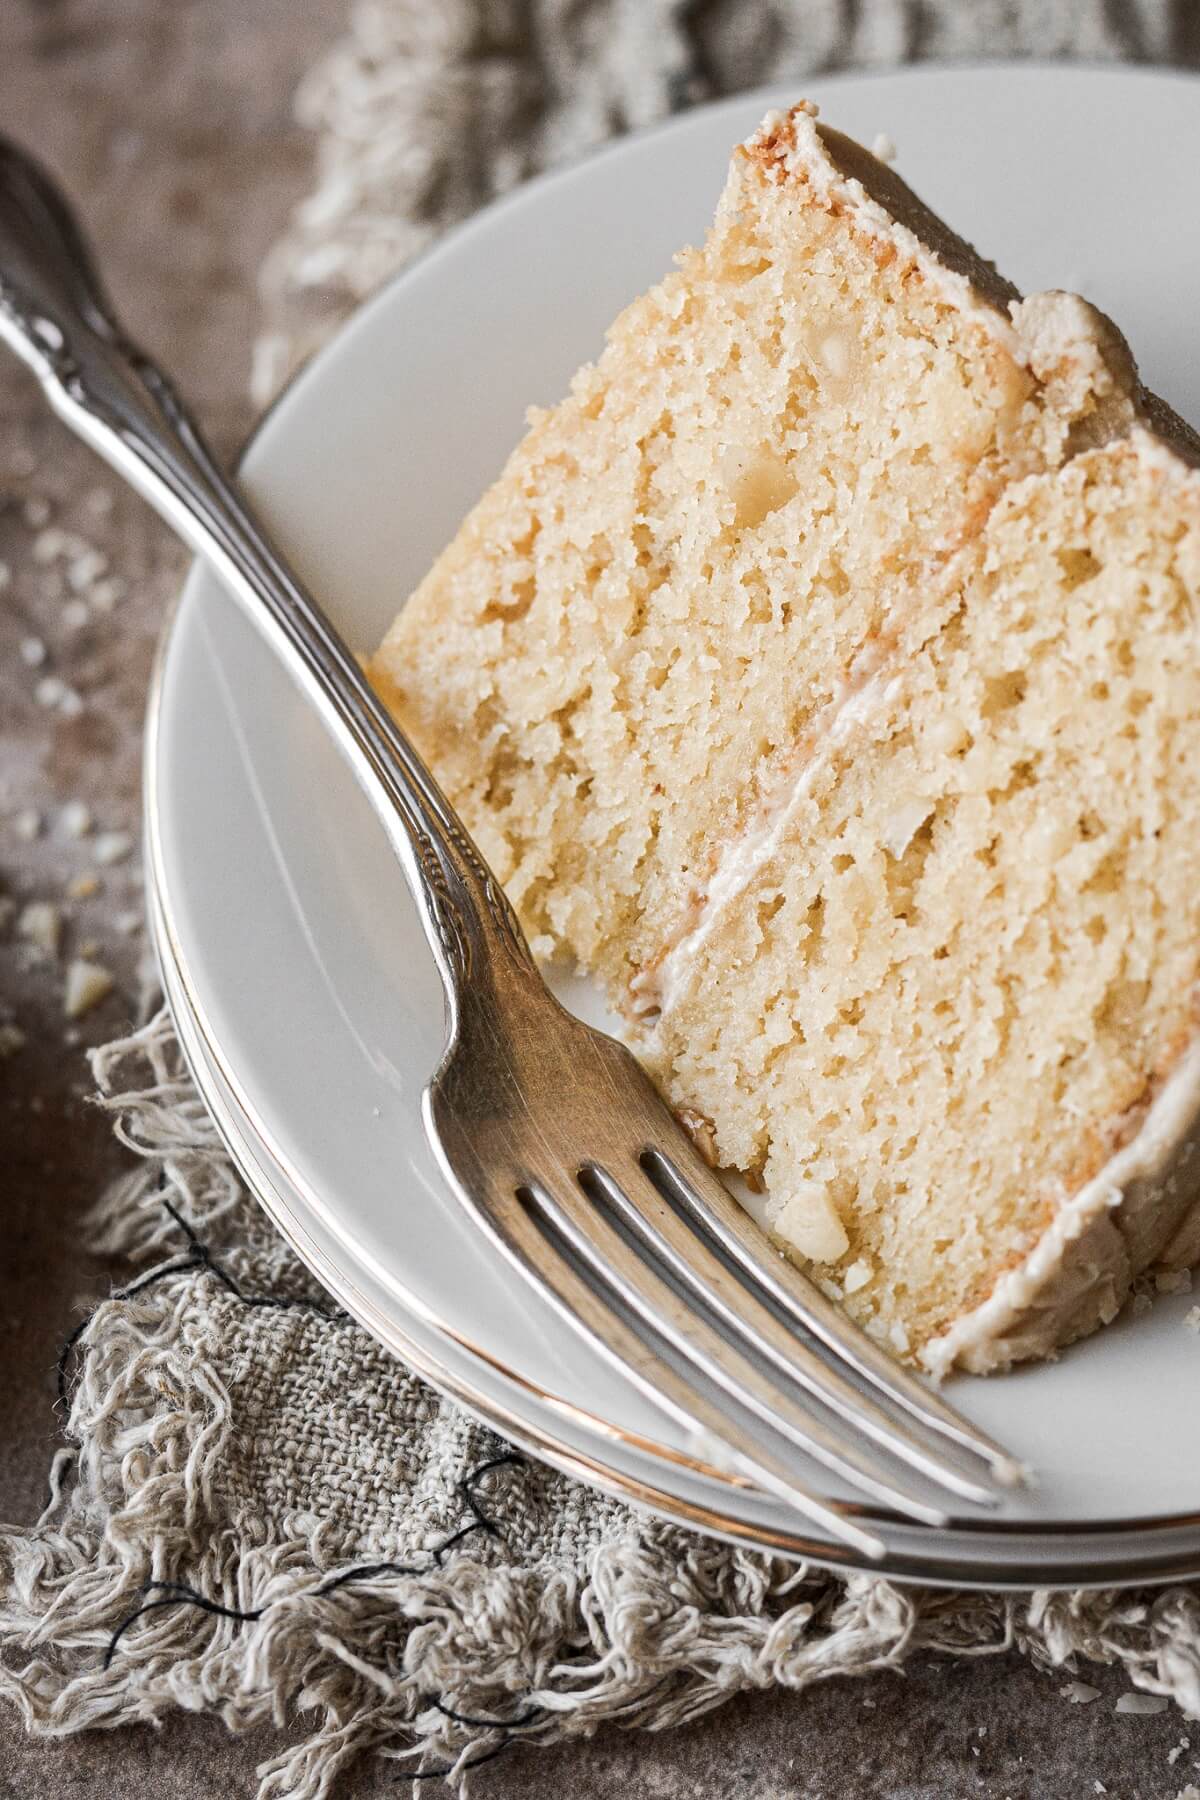 Slice of macadamia nut cake with a vintage fork.